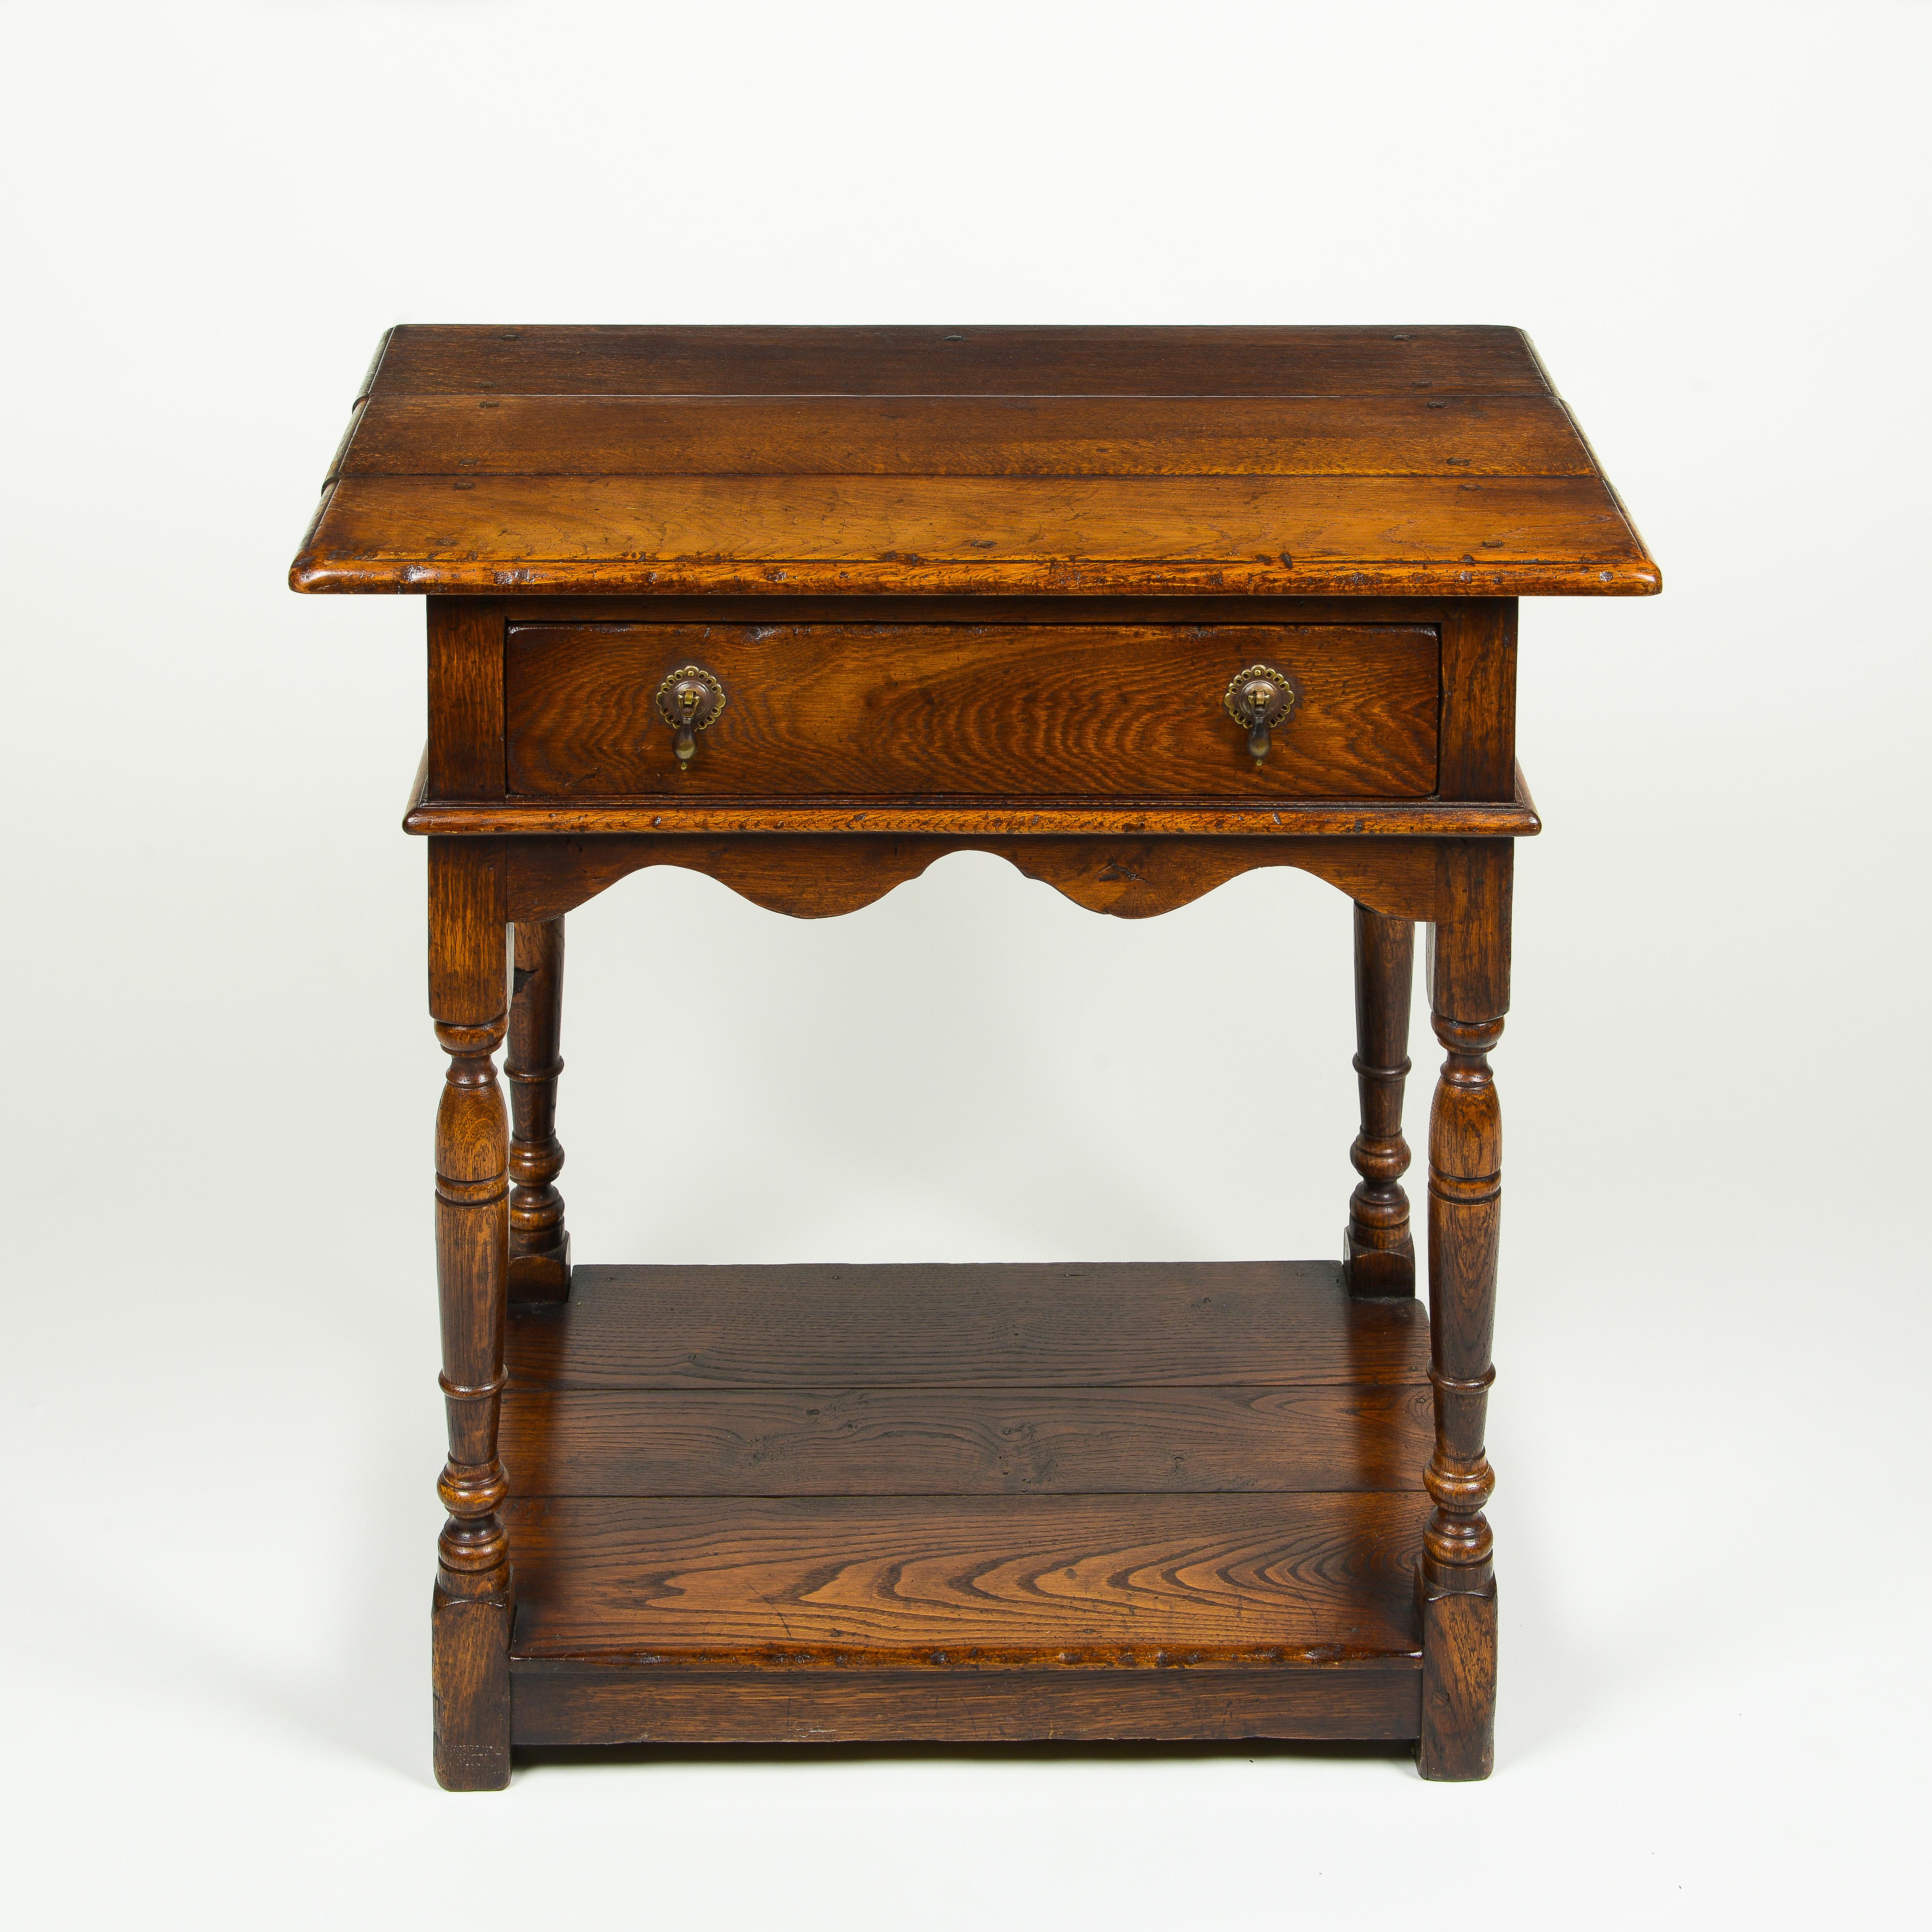 The rectangular overhanging top, above a frieze drawer mounted with original brass drop handles, and scalloped apron; raised on tapering, turned legs joined by a platform stretcher.